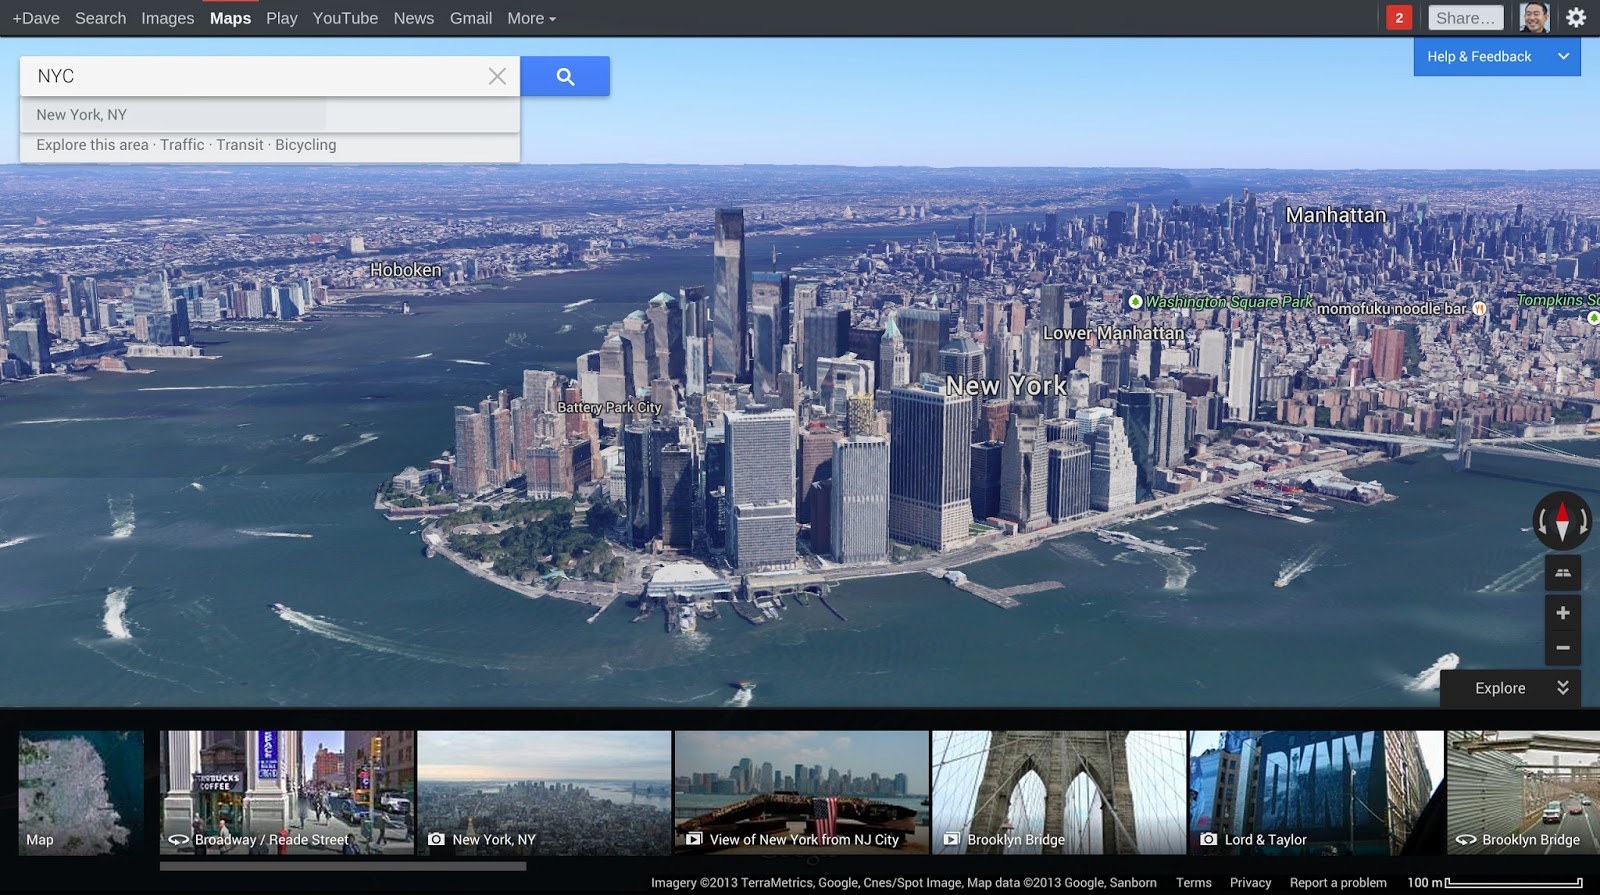 New York City in redesigned Google Maps with Explore box (2013)